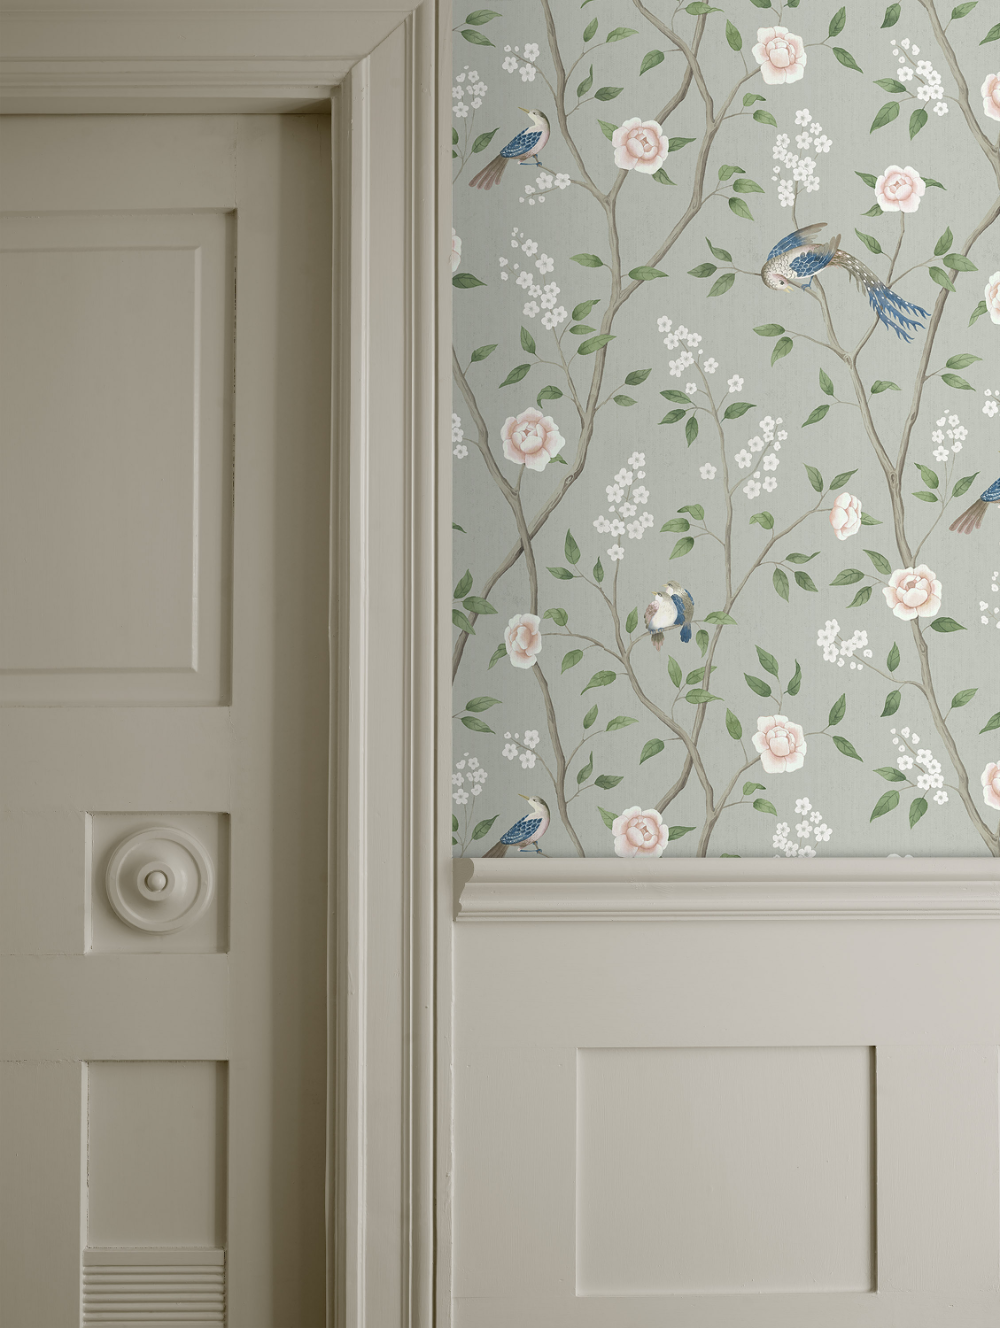 The wallpaper pattern Paradise Birds from Bor?stapeter Green floral wallpaper | Paradise Birds | Swedish designer | Bor?stapeter - The wallpaper pattern Paradise Birds from Bor?stapeter Green floral wallpaper | Paradise Birds | Swedish designer | Bor?stapeter -   14 beauty Wallpaper green ideas